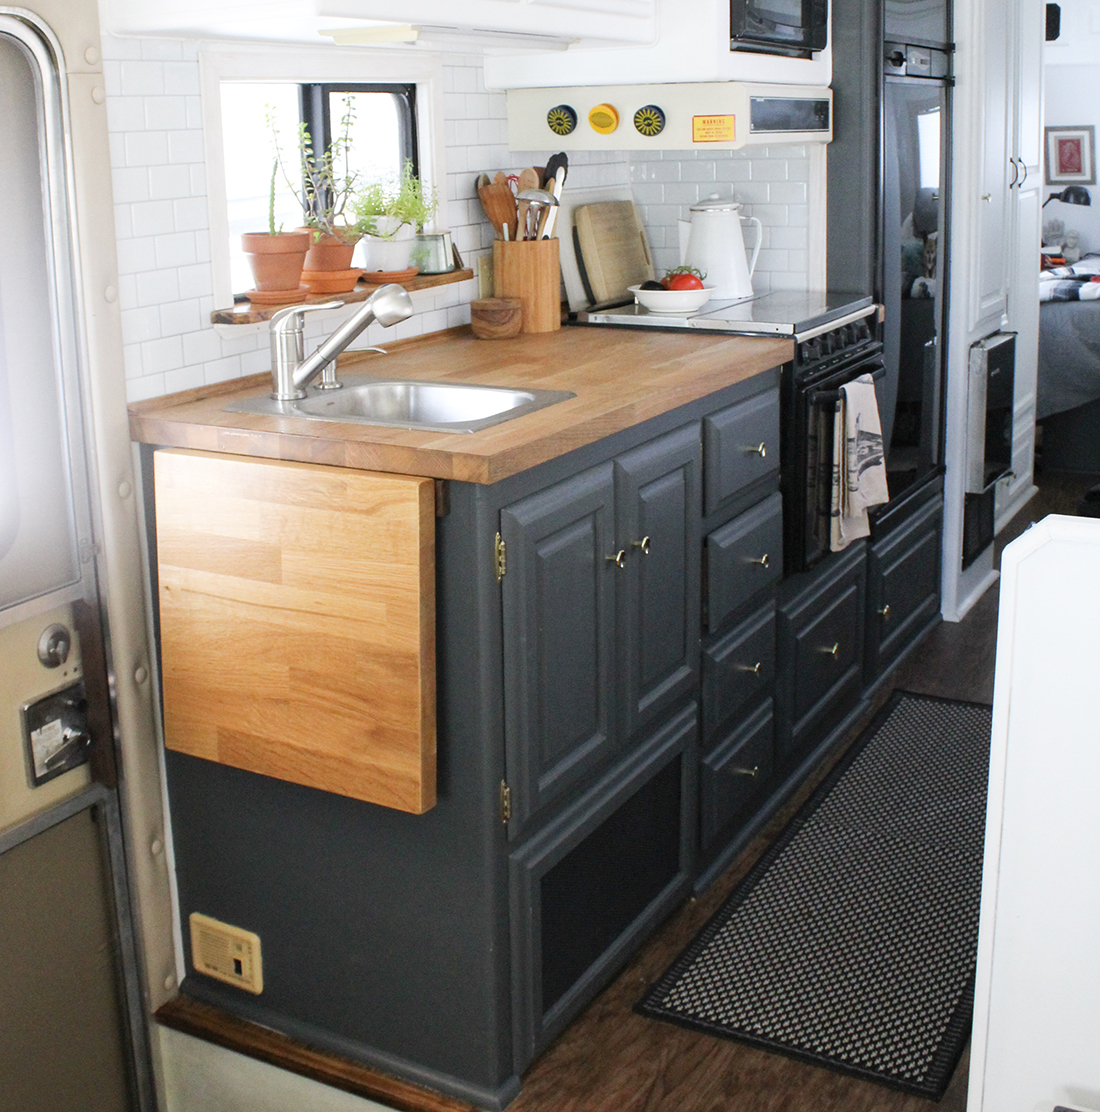 A rug covers the passage leading through the galley of a motorhome.